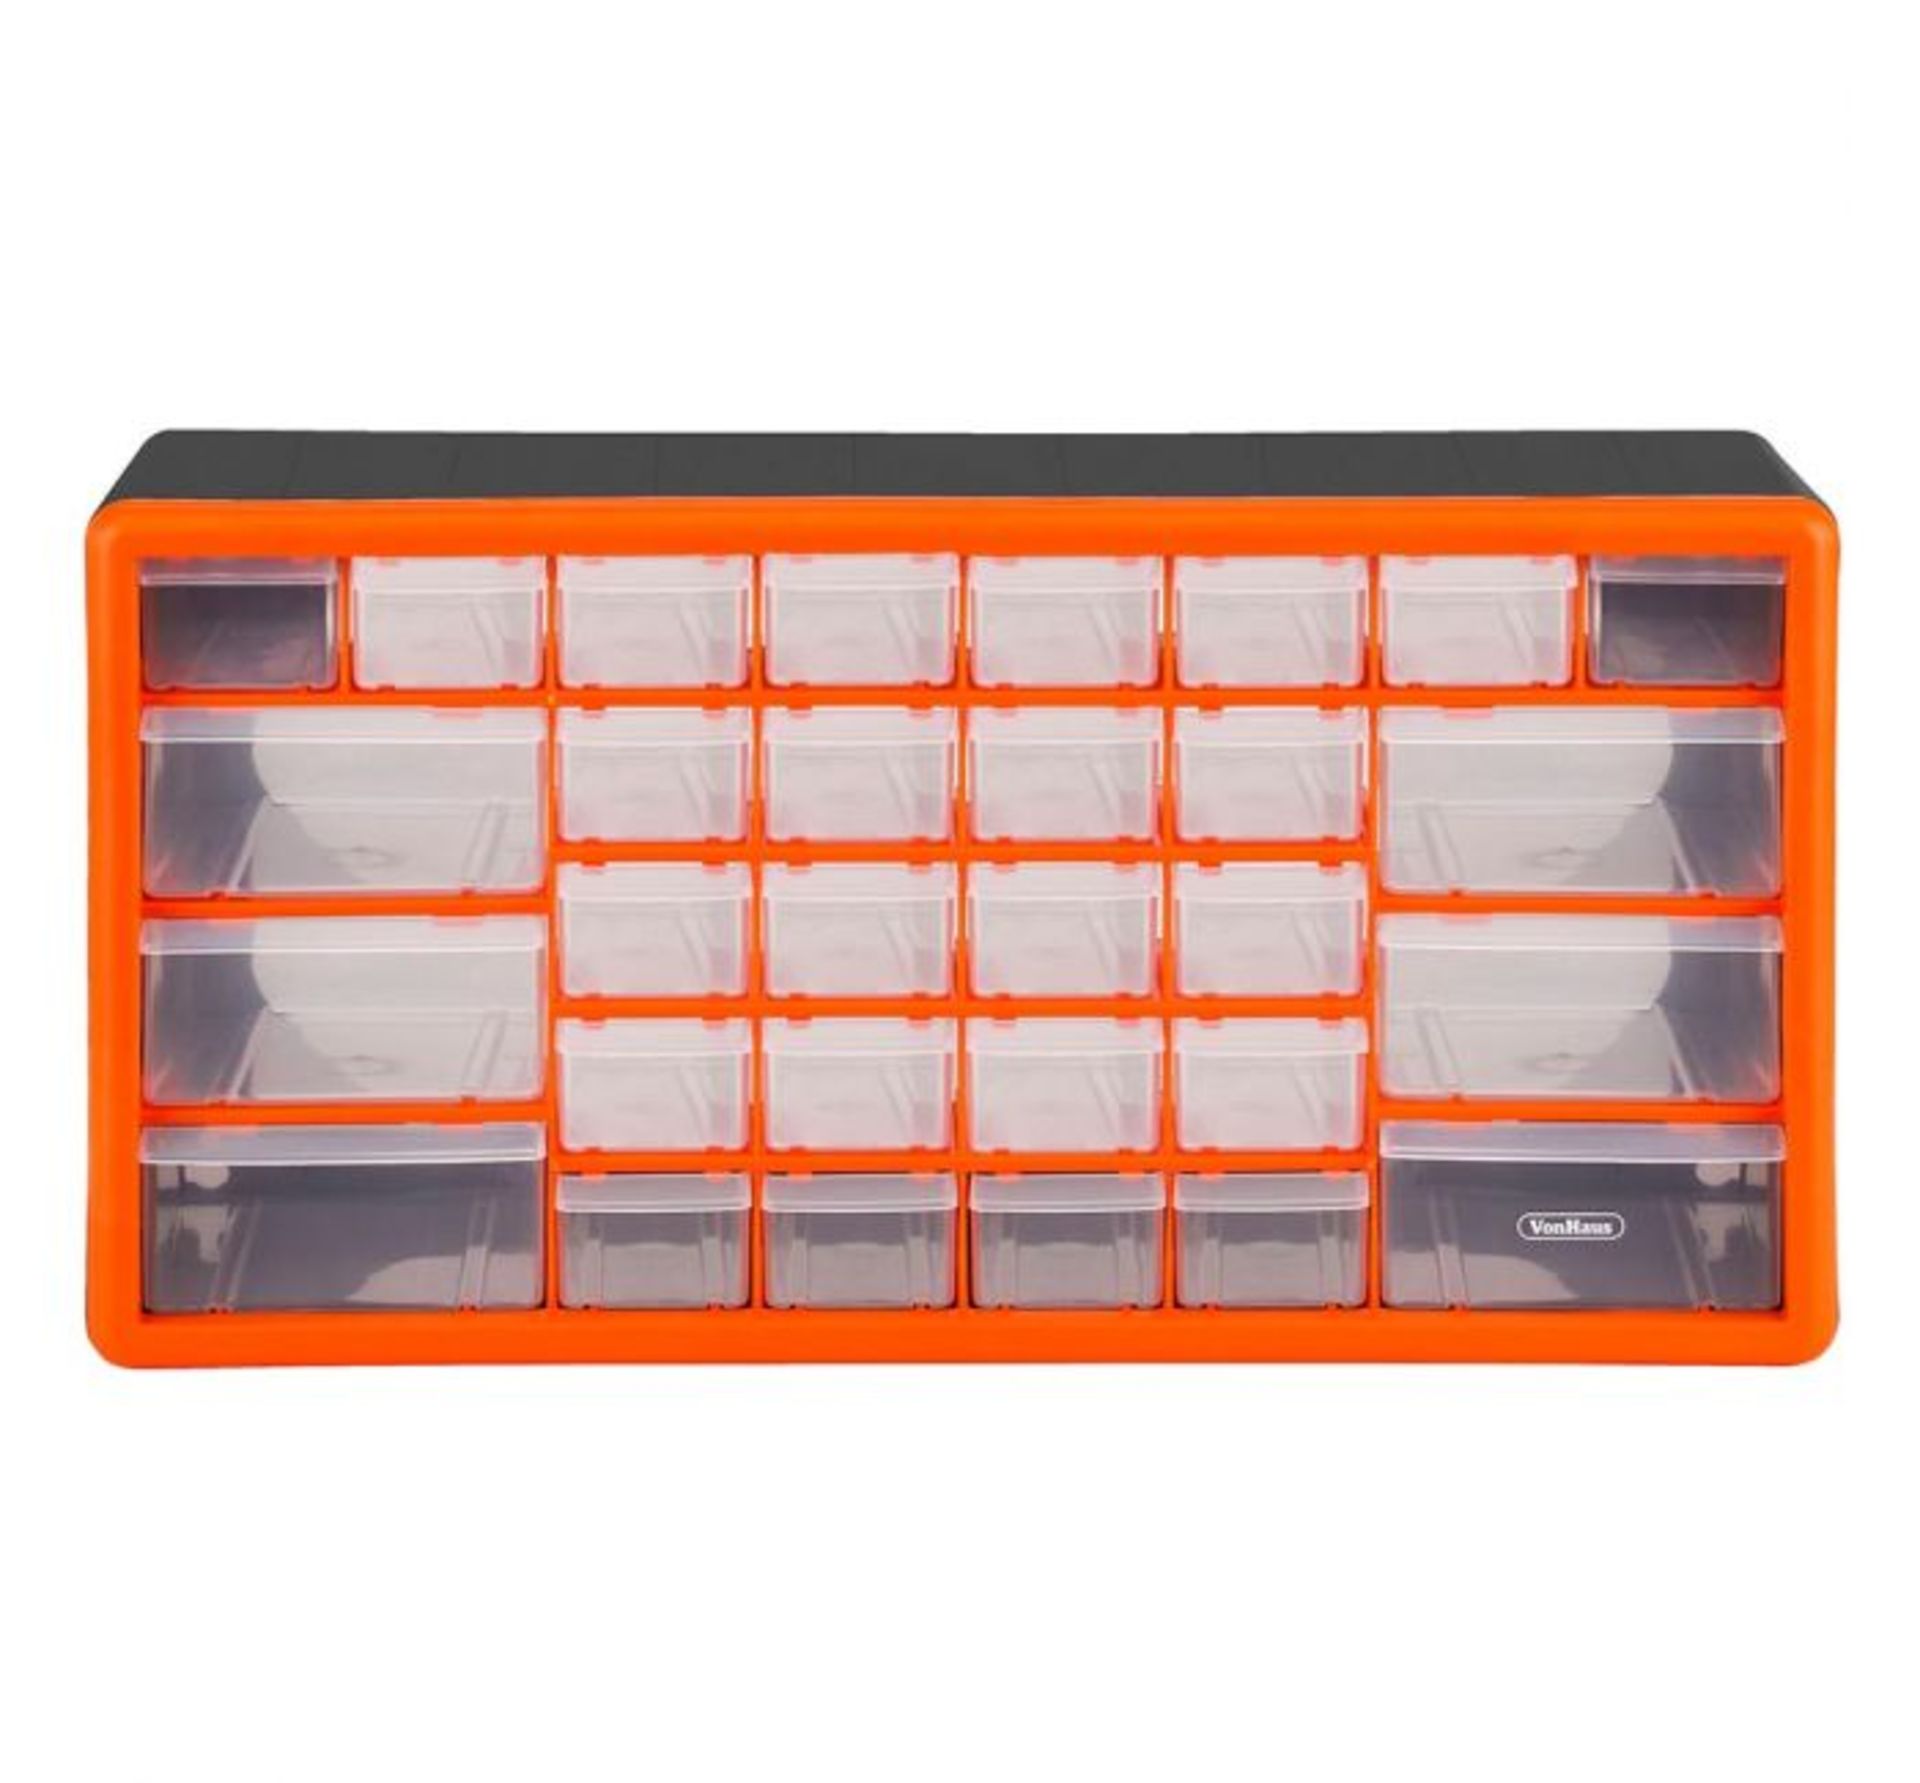 (GL98) 30 Drawer Storage Organiser Ideal for storing small parts such as nuts, bolts, screws, ... - Image 3 of 3